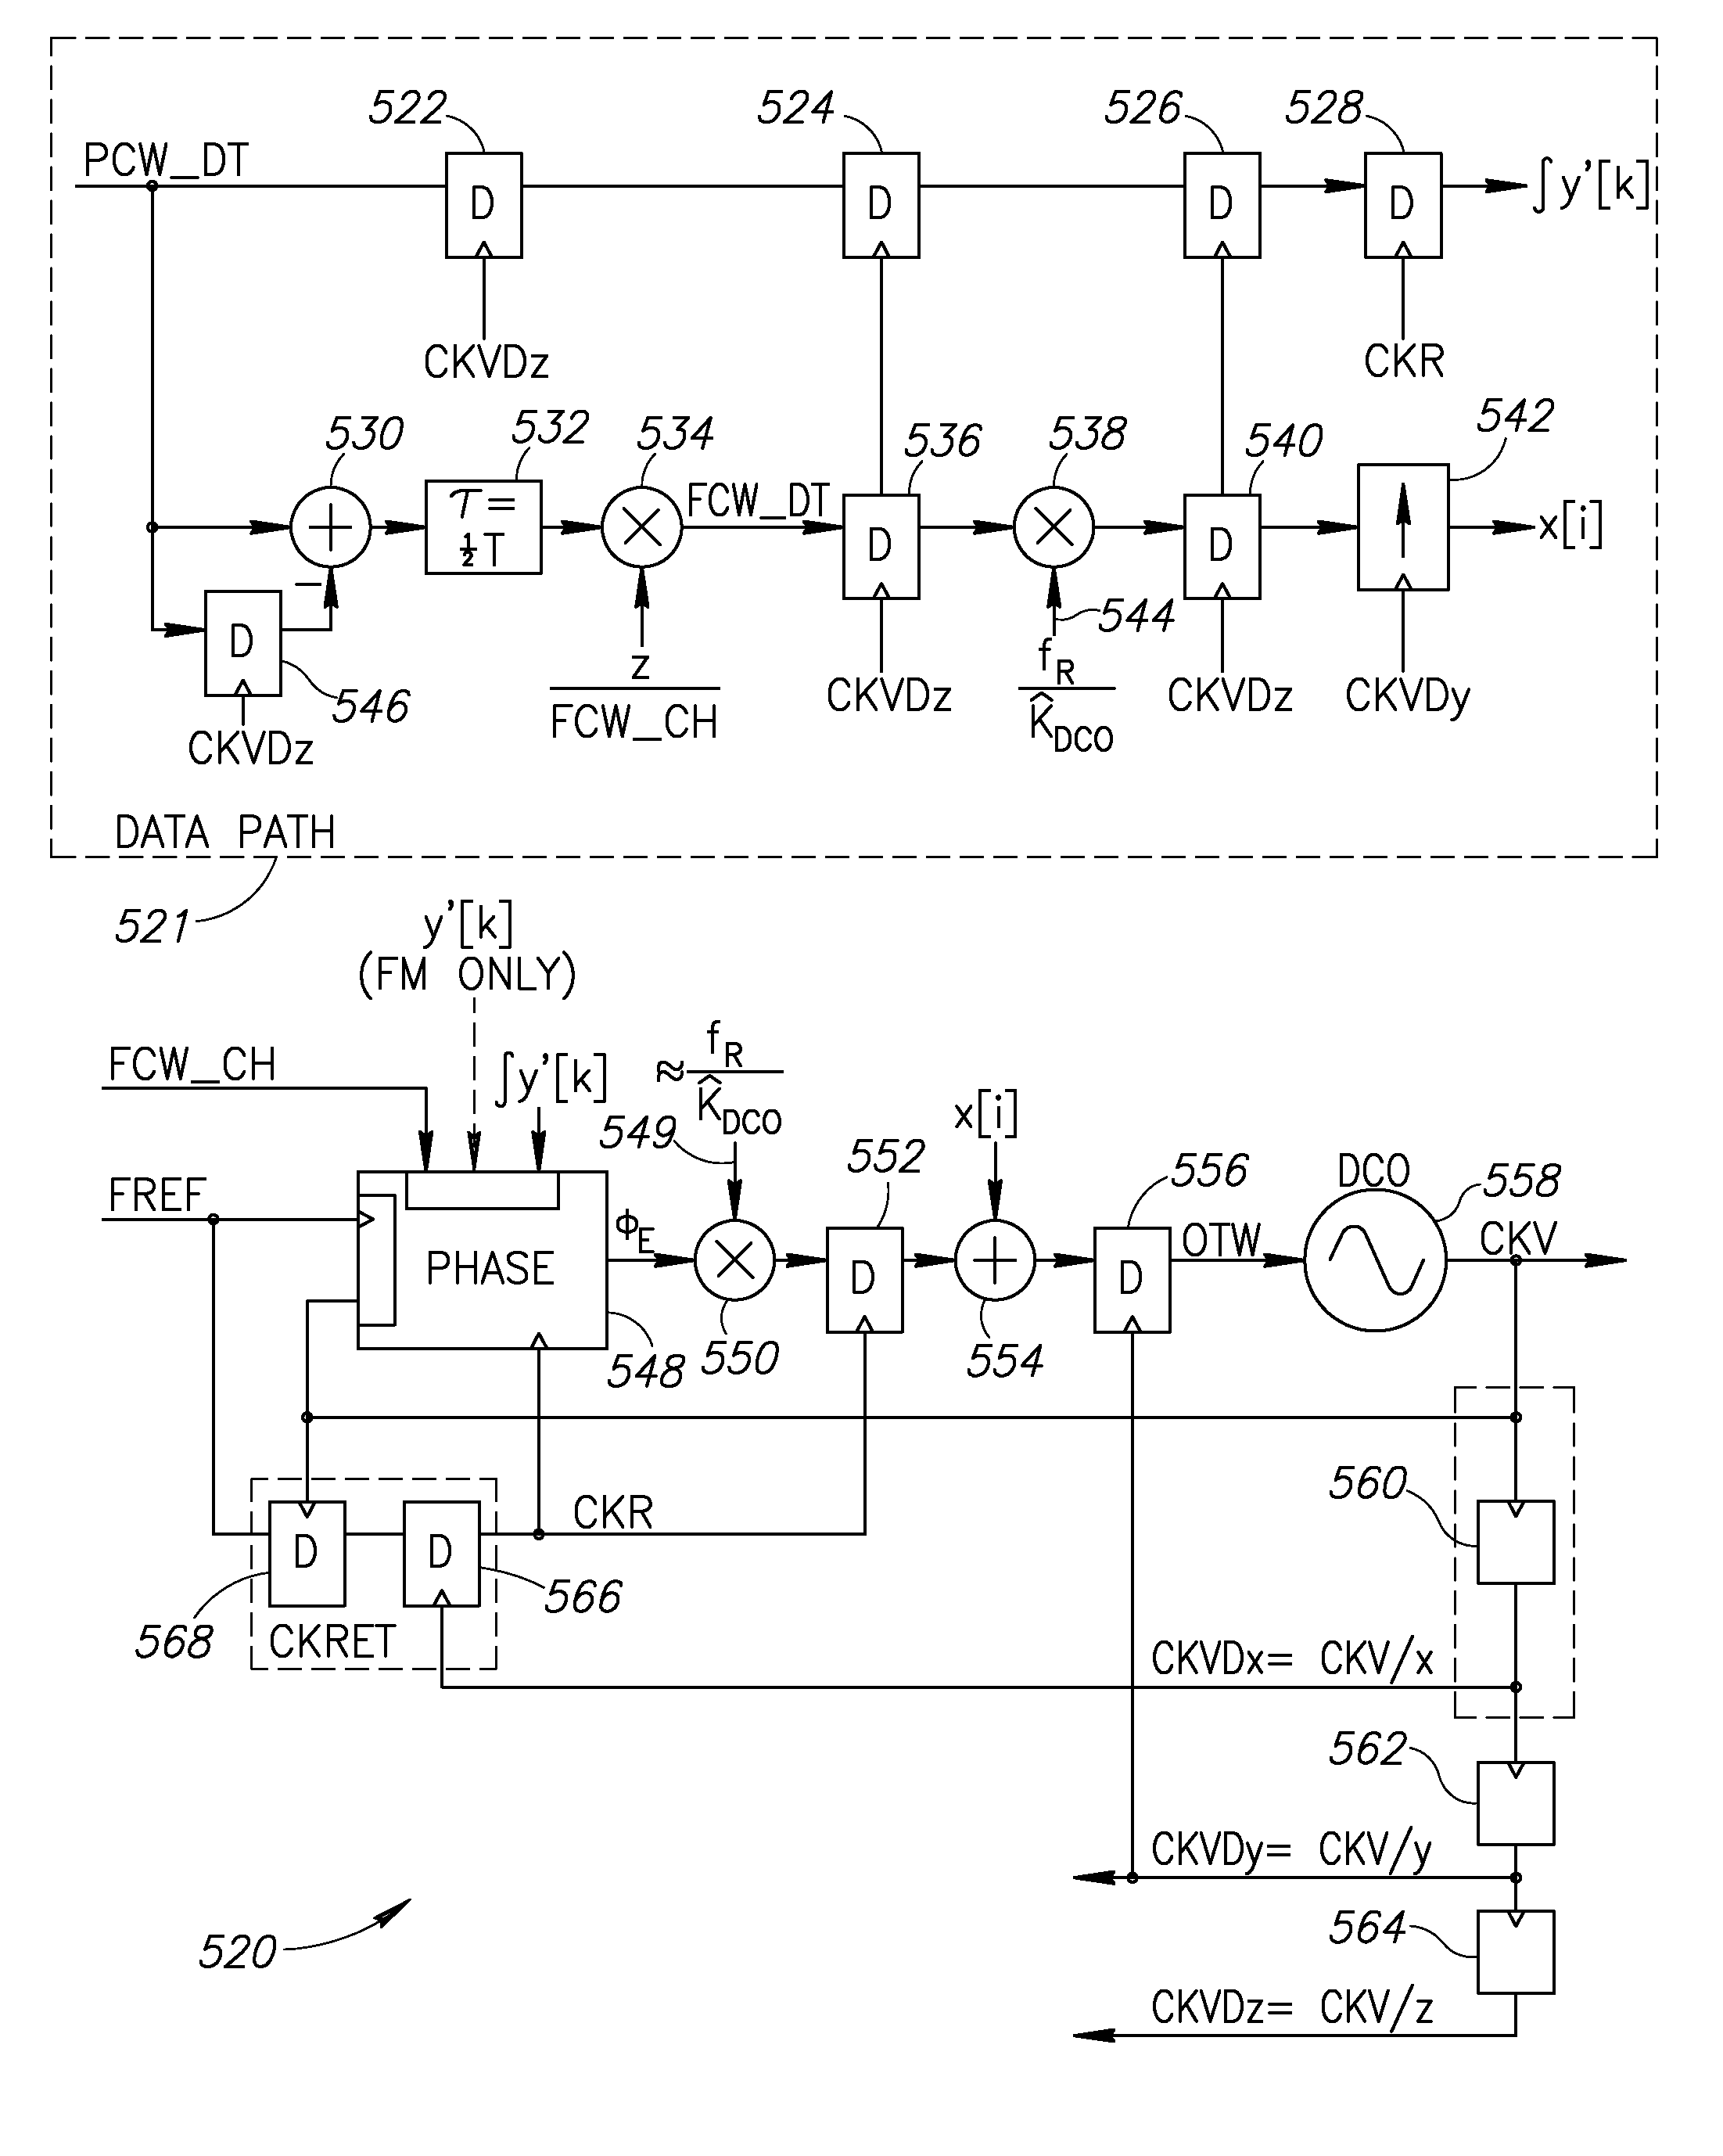 Delay alignment in a closed loop two-point modulation all digital phase locked loop